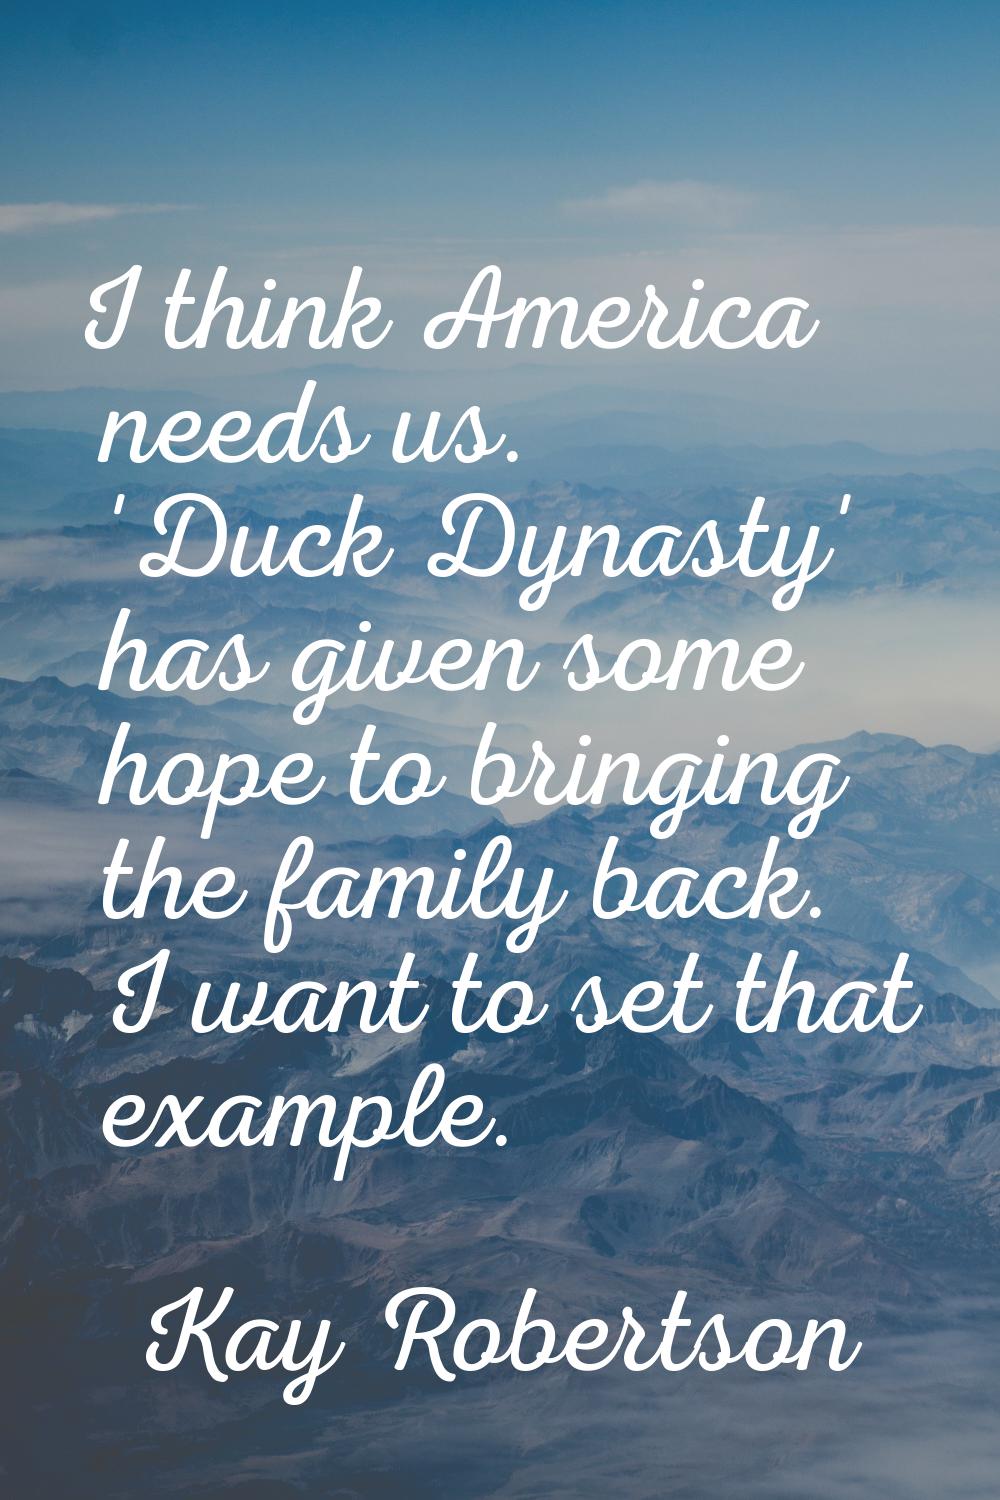 I think America needs us. 'Duck Dynasty' has given some hope to bringing the family back. I want to